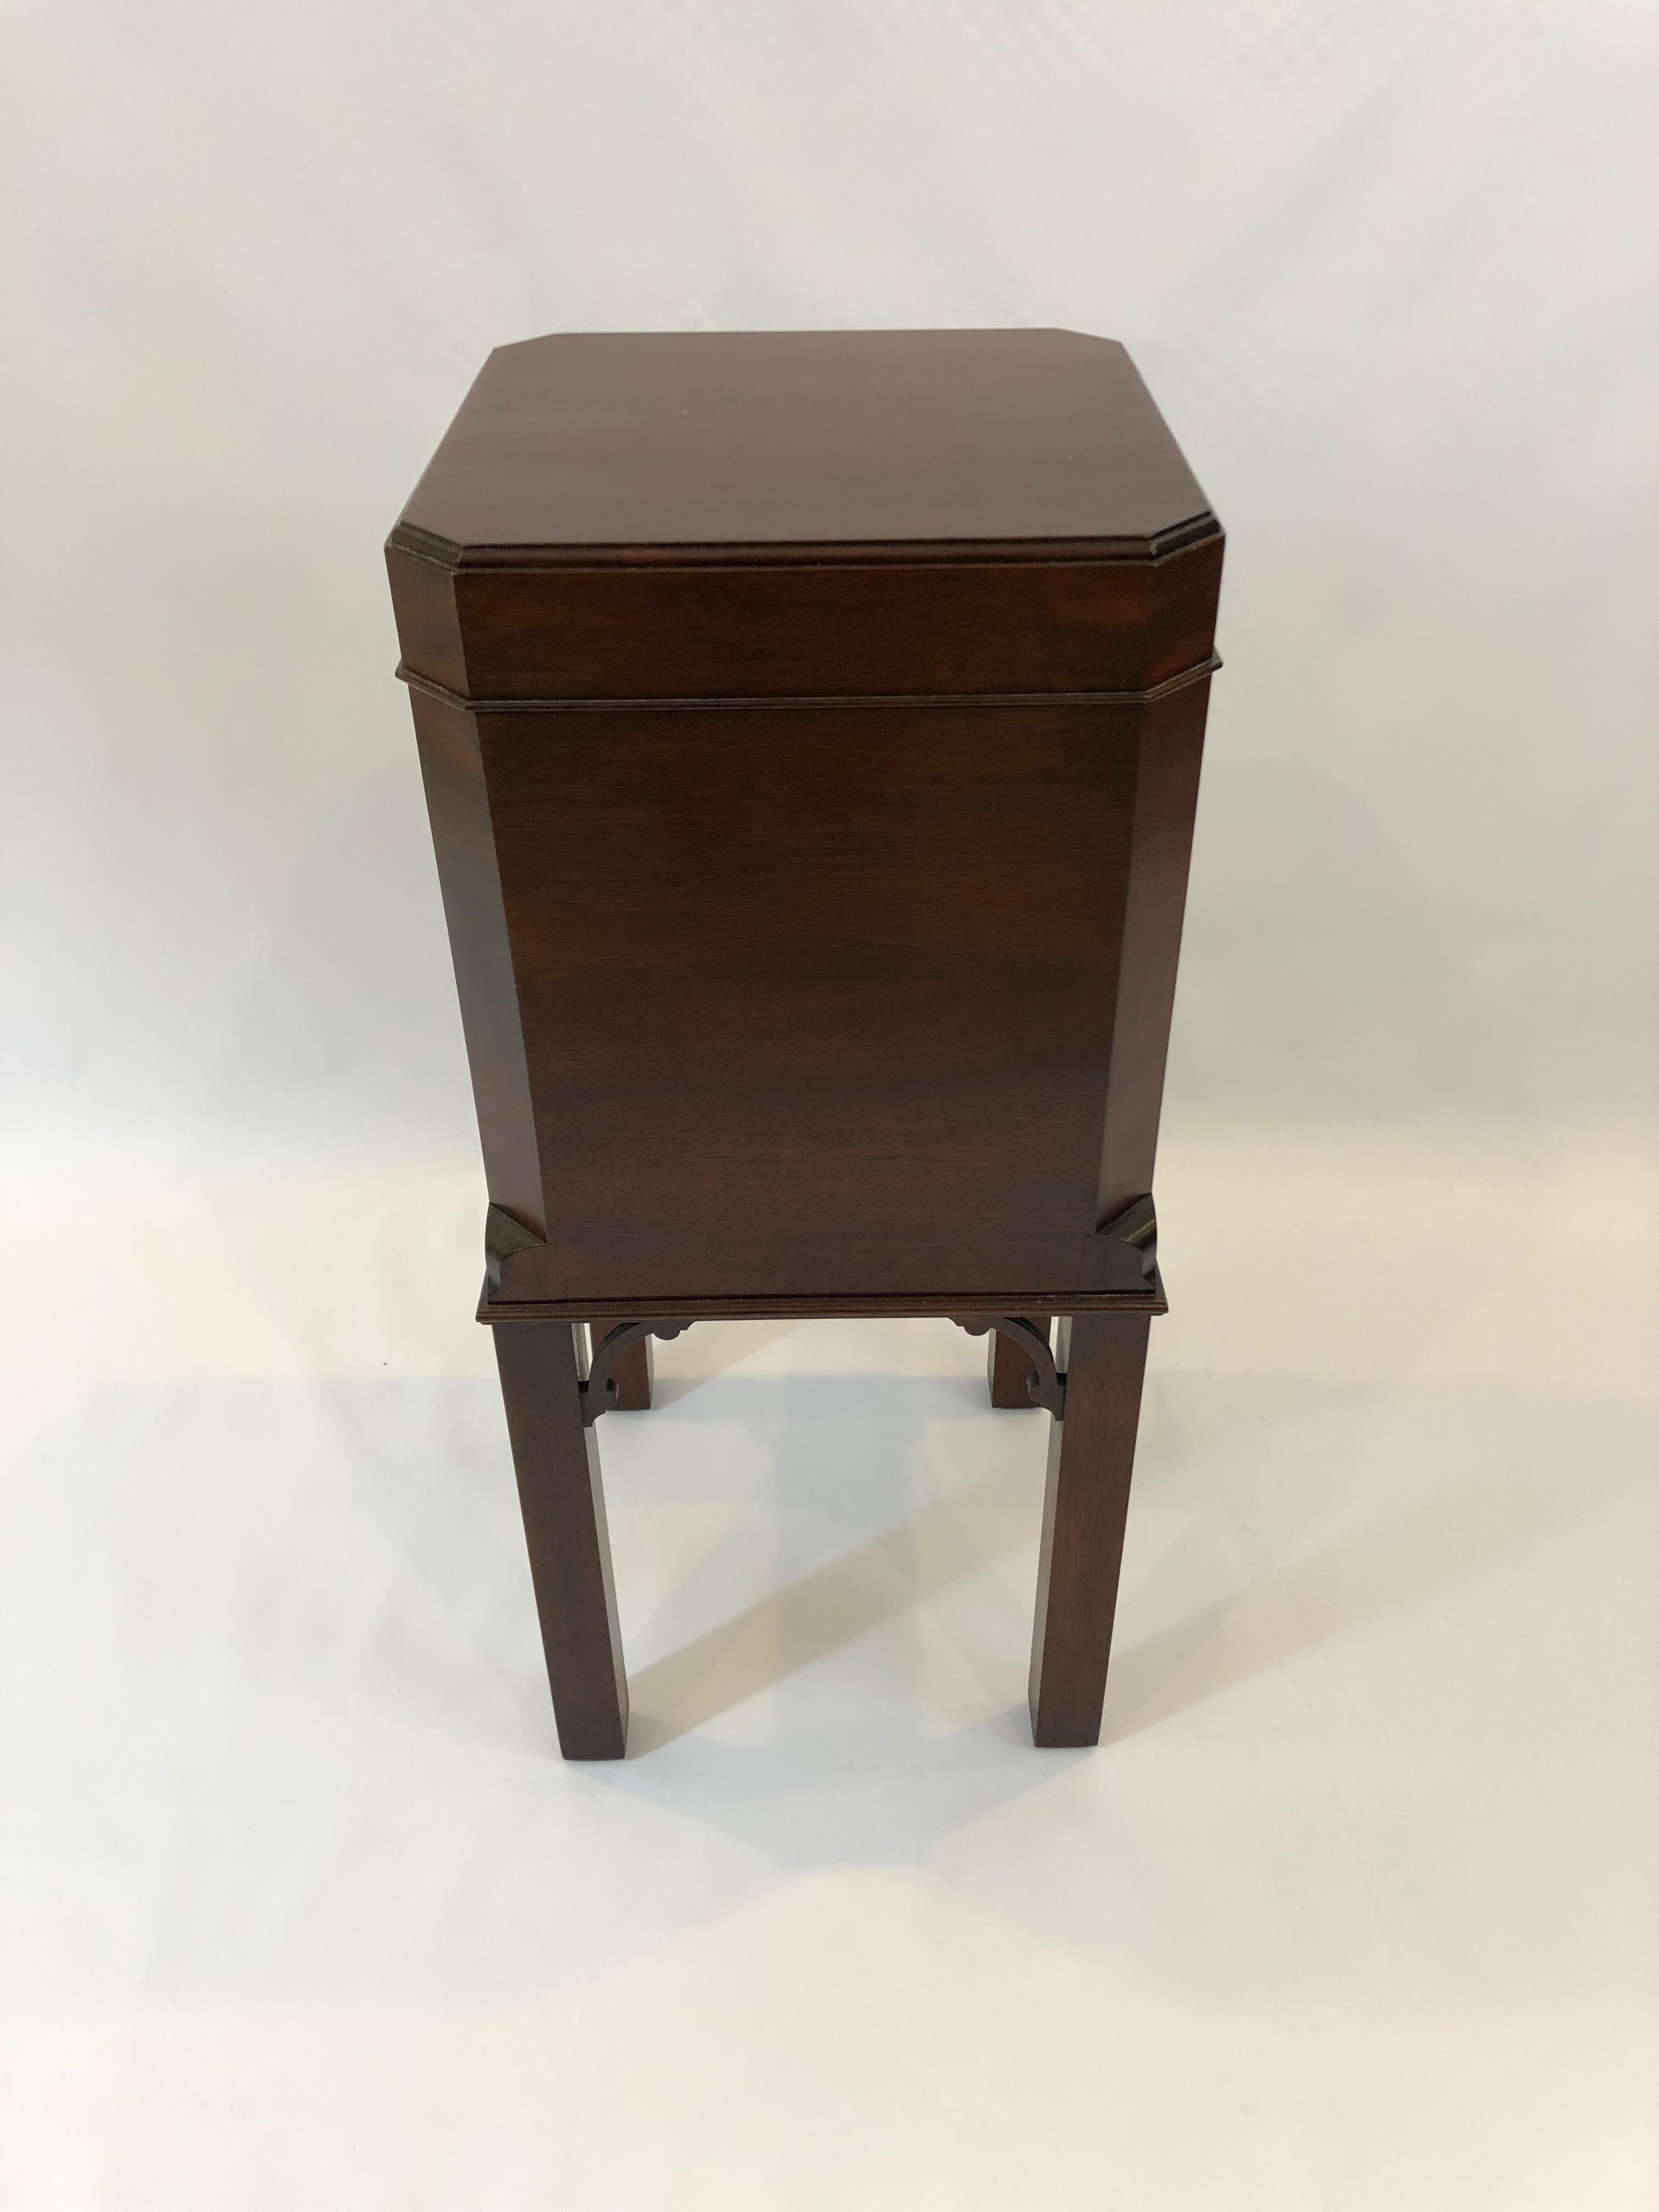 A small beautifully crafted mahogany cellarette used to house bottles of wine and also functions as an interesting end or side table cabinet. By tradition house Williamsburg Edition, stamped on bottom.
Measures: Interior 12 x 11.25.